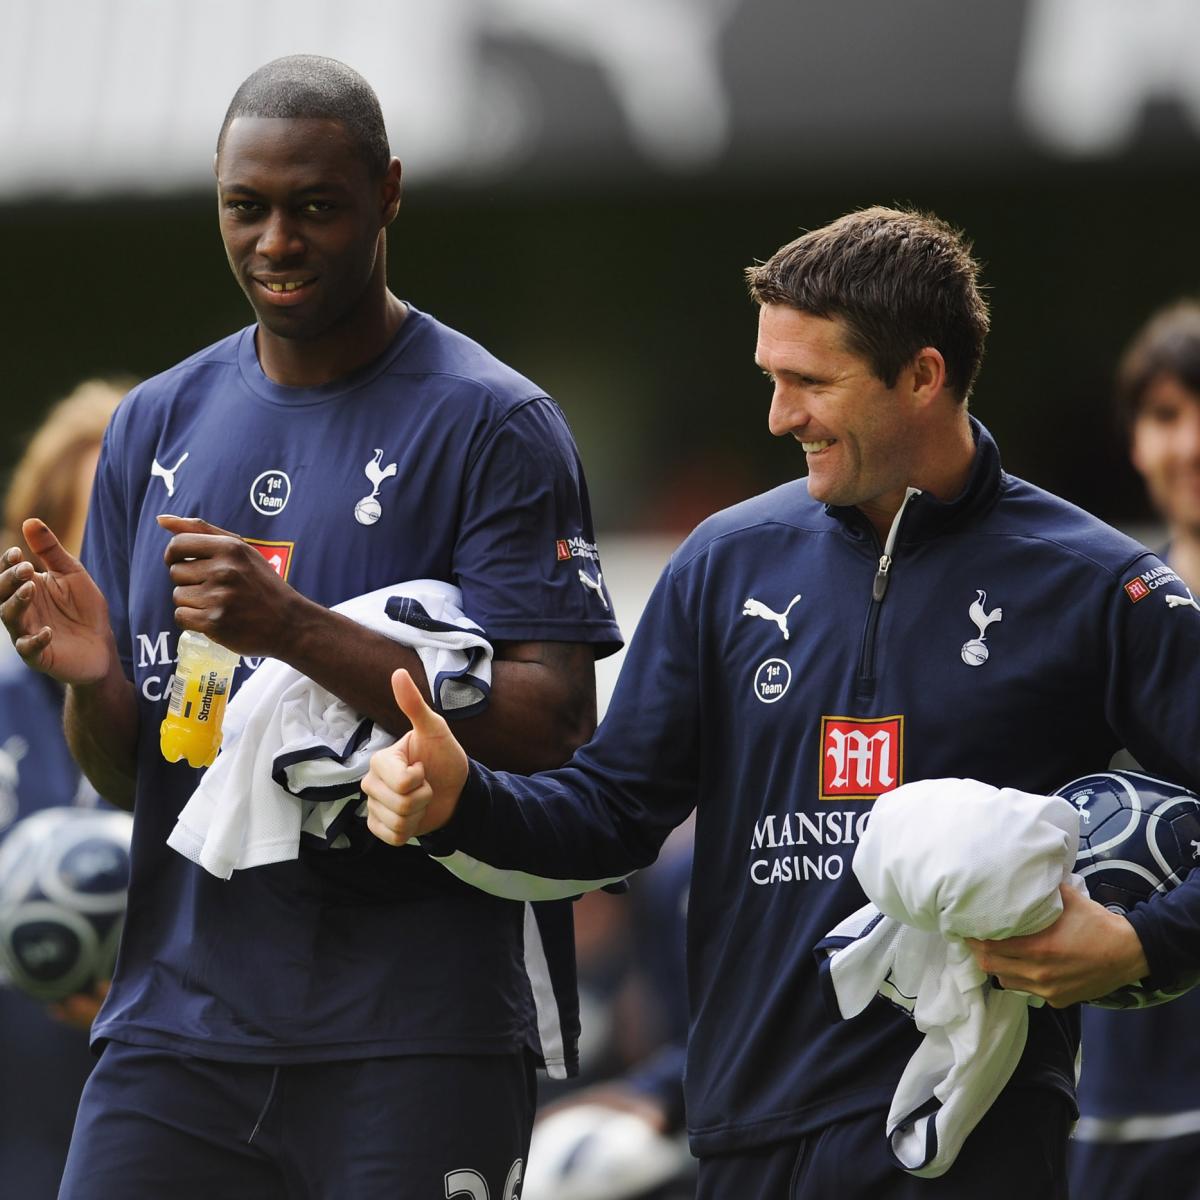 Officially official: Ledley King announced as Tottenham's newest